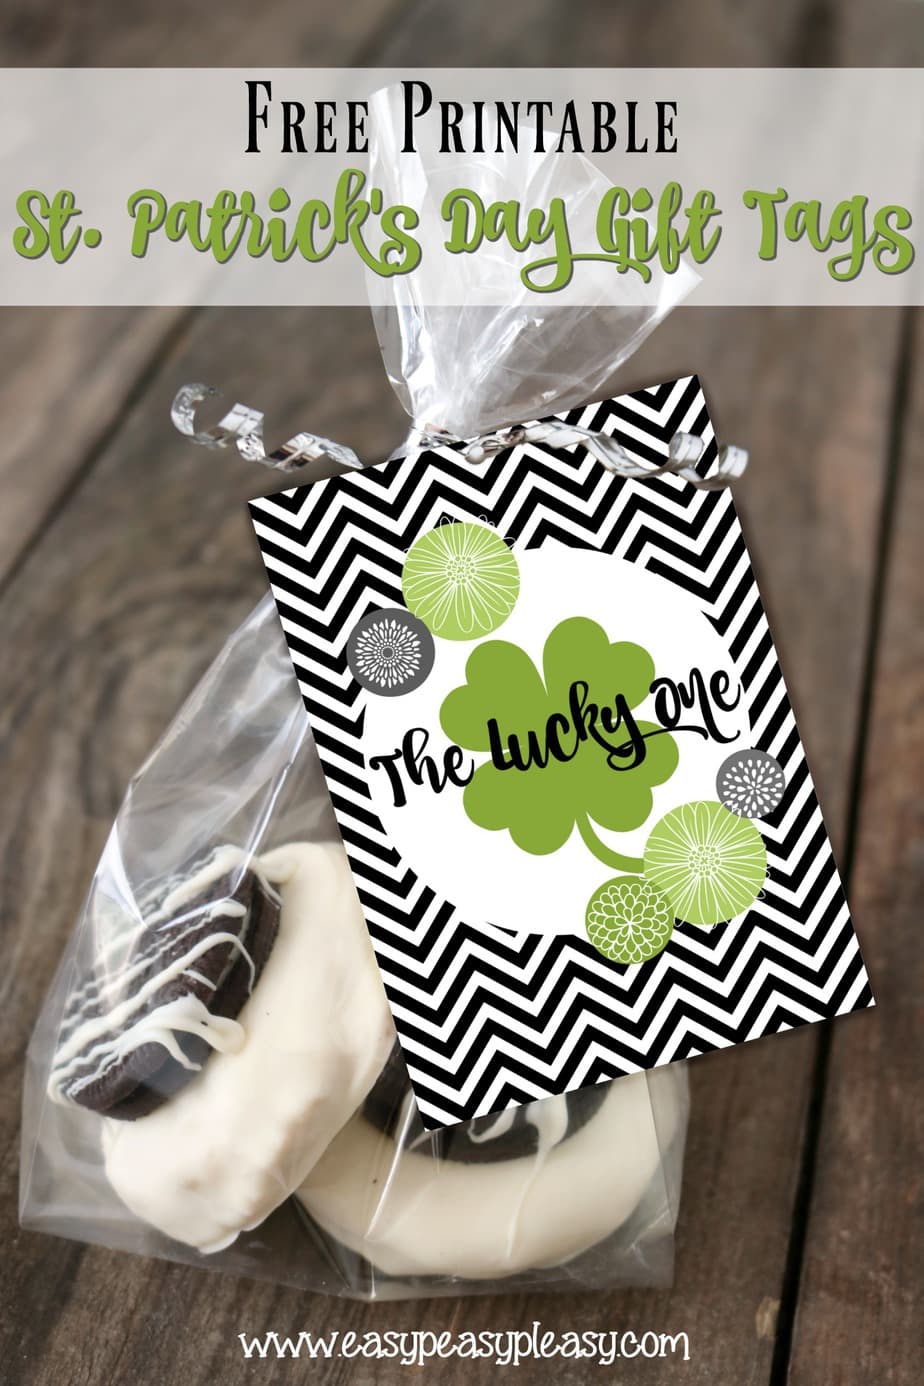 Free Printable St Patrick's Day Gift Tags